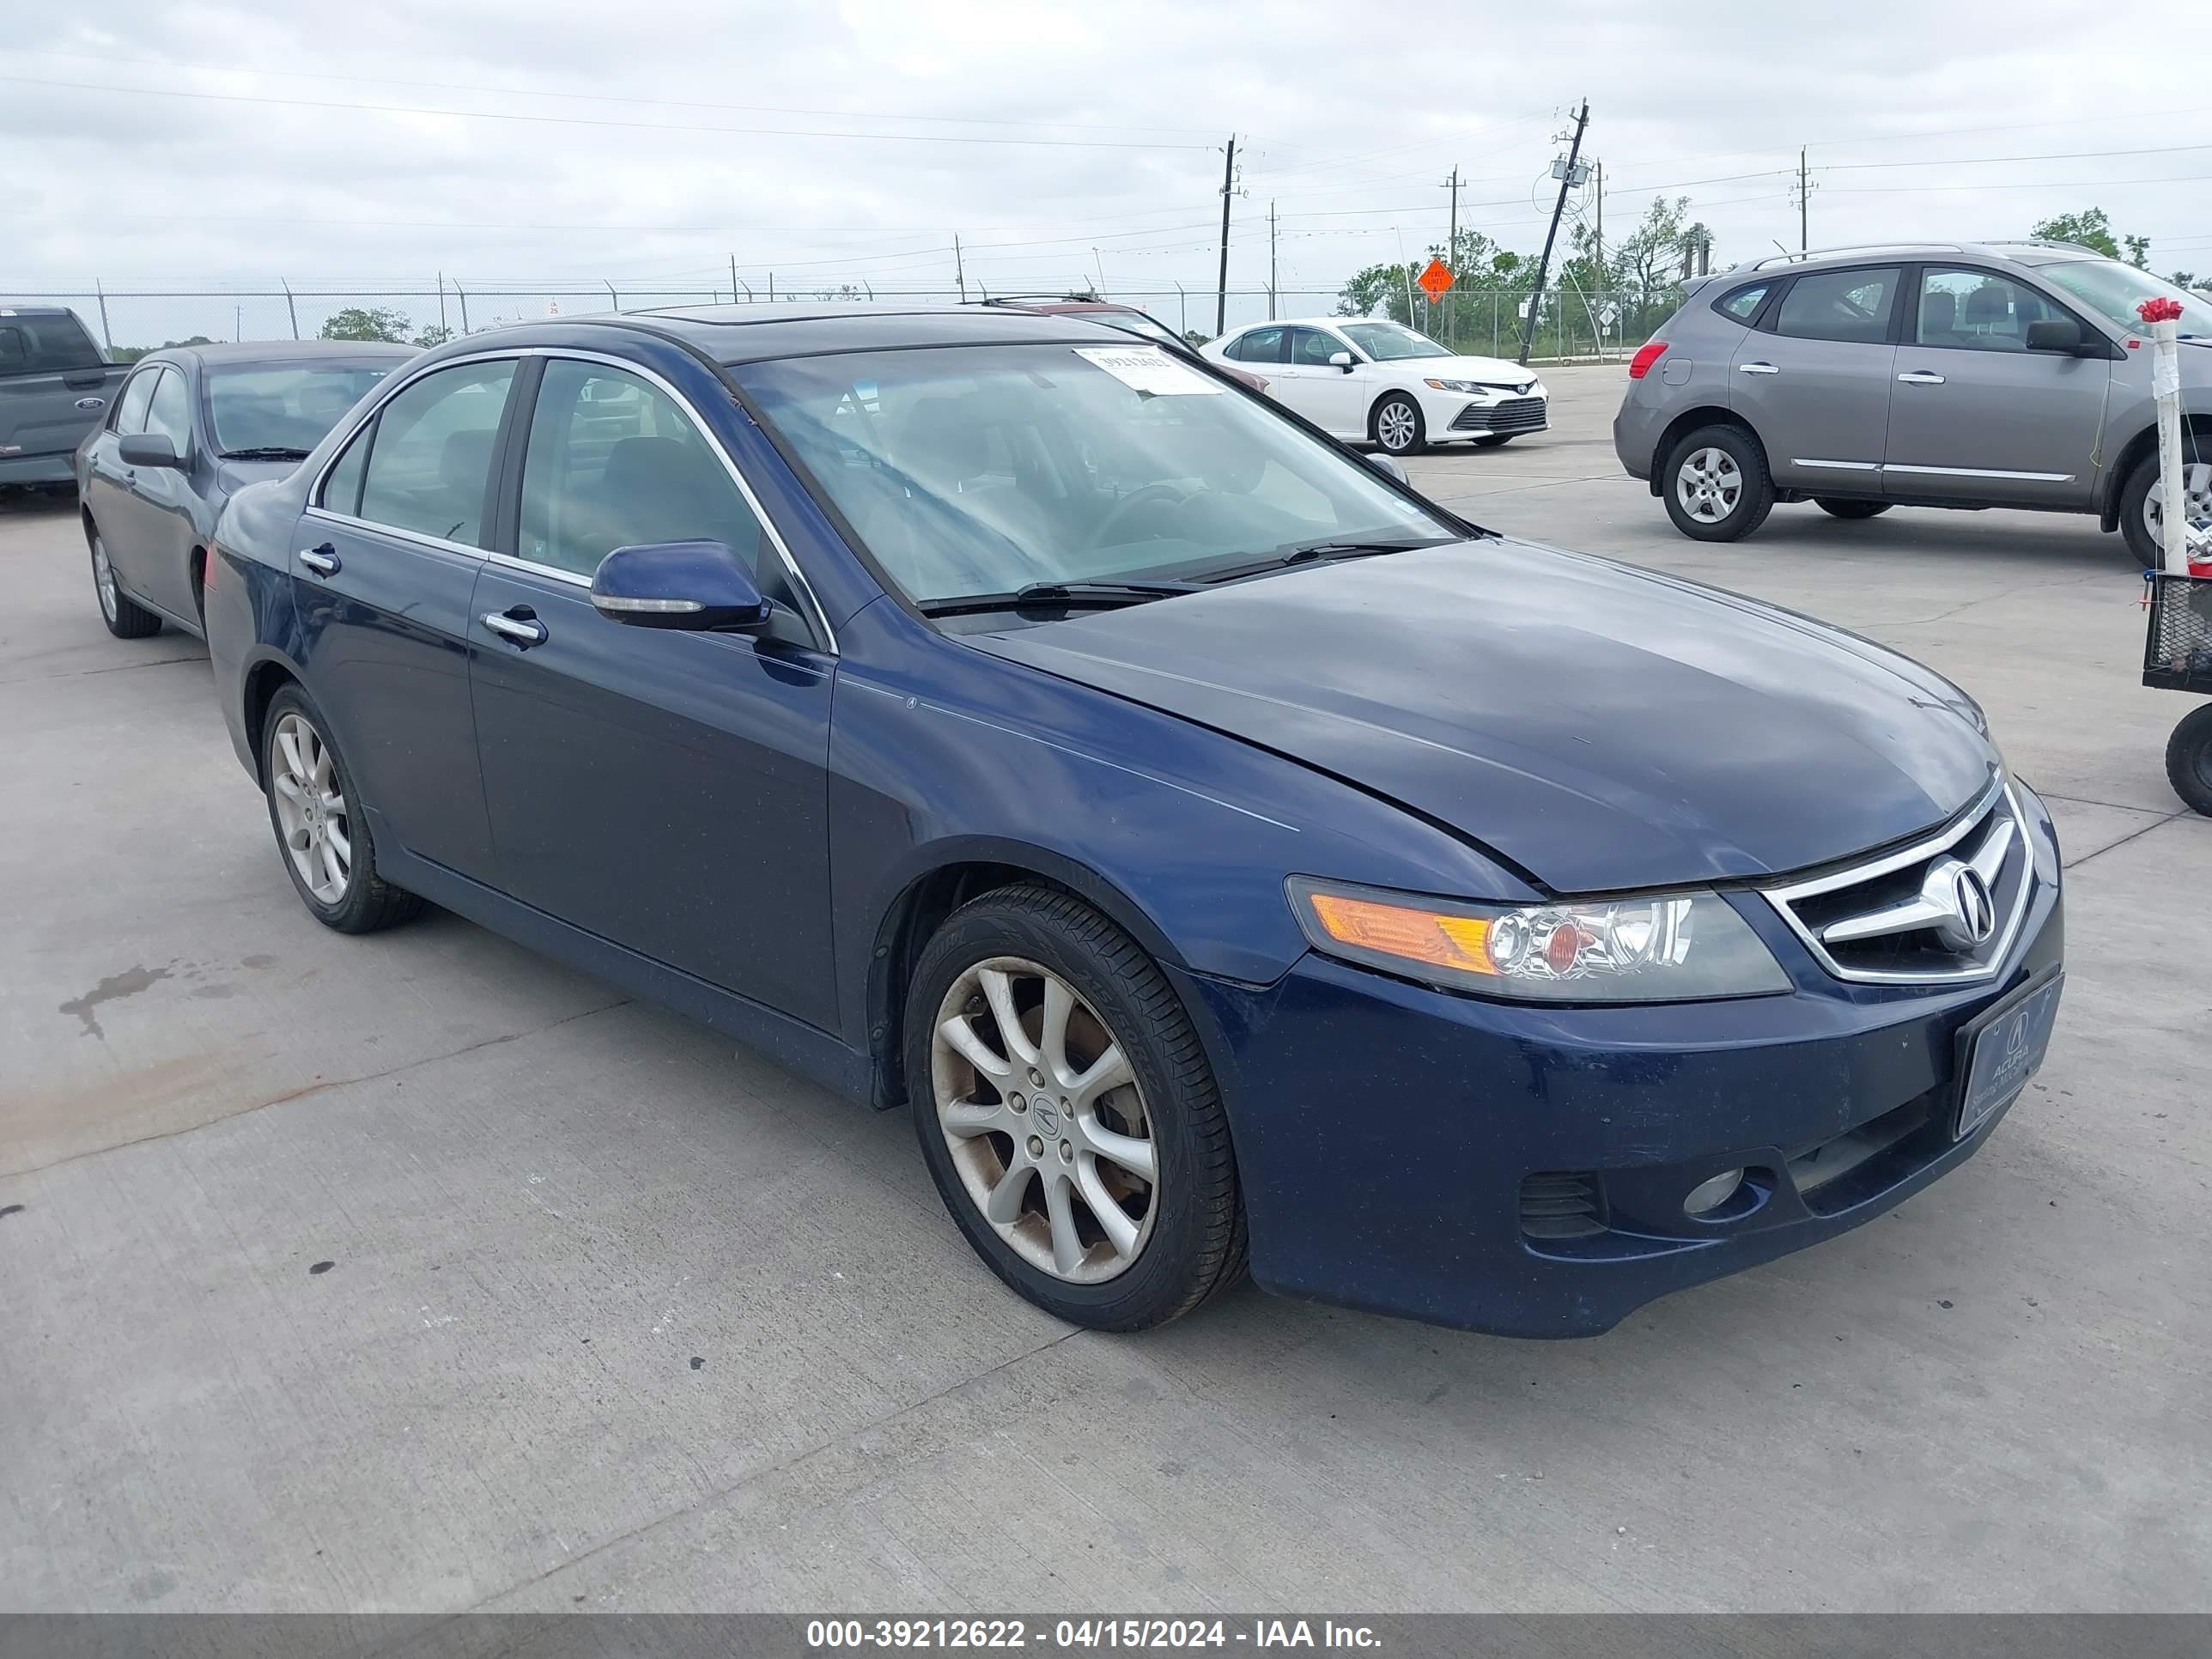 acura tsx 2008 jh4cl96868c011387